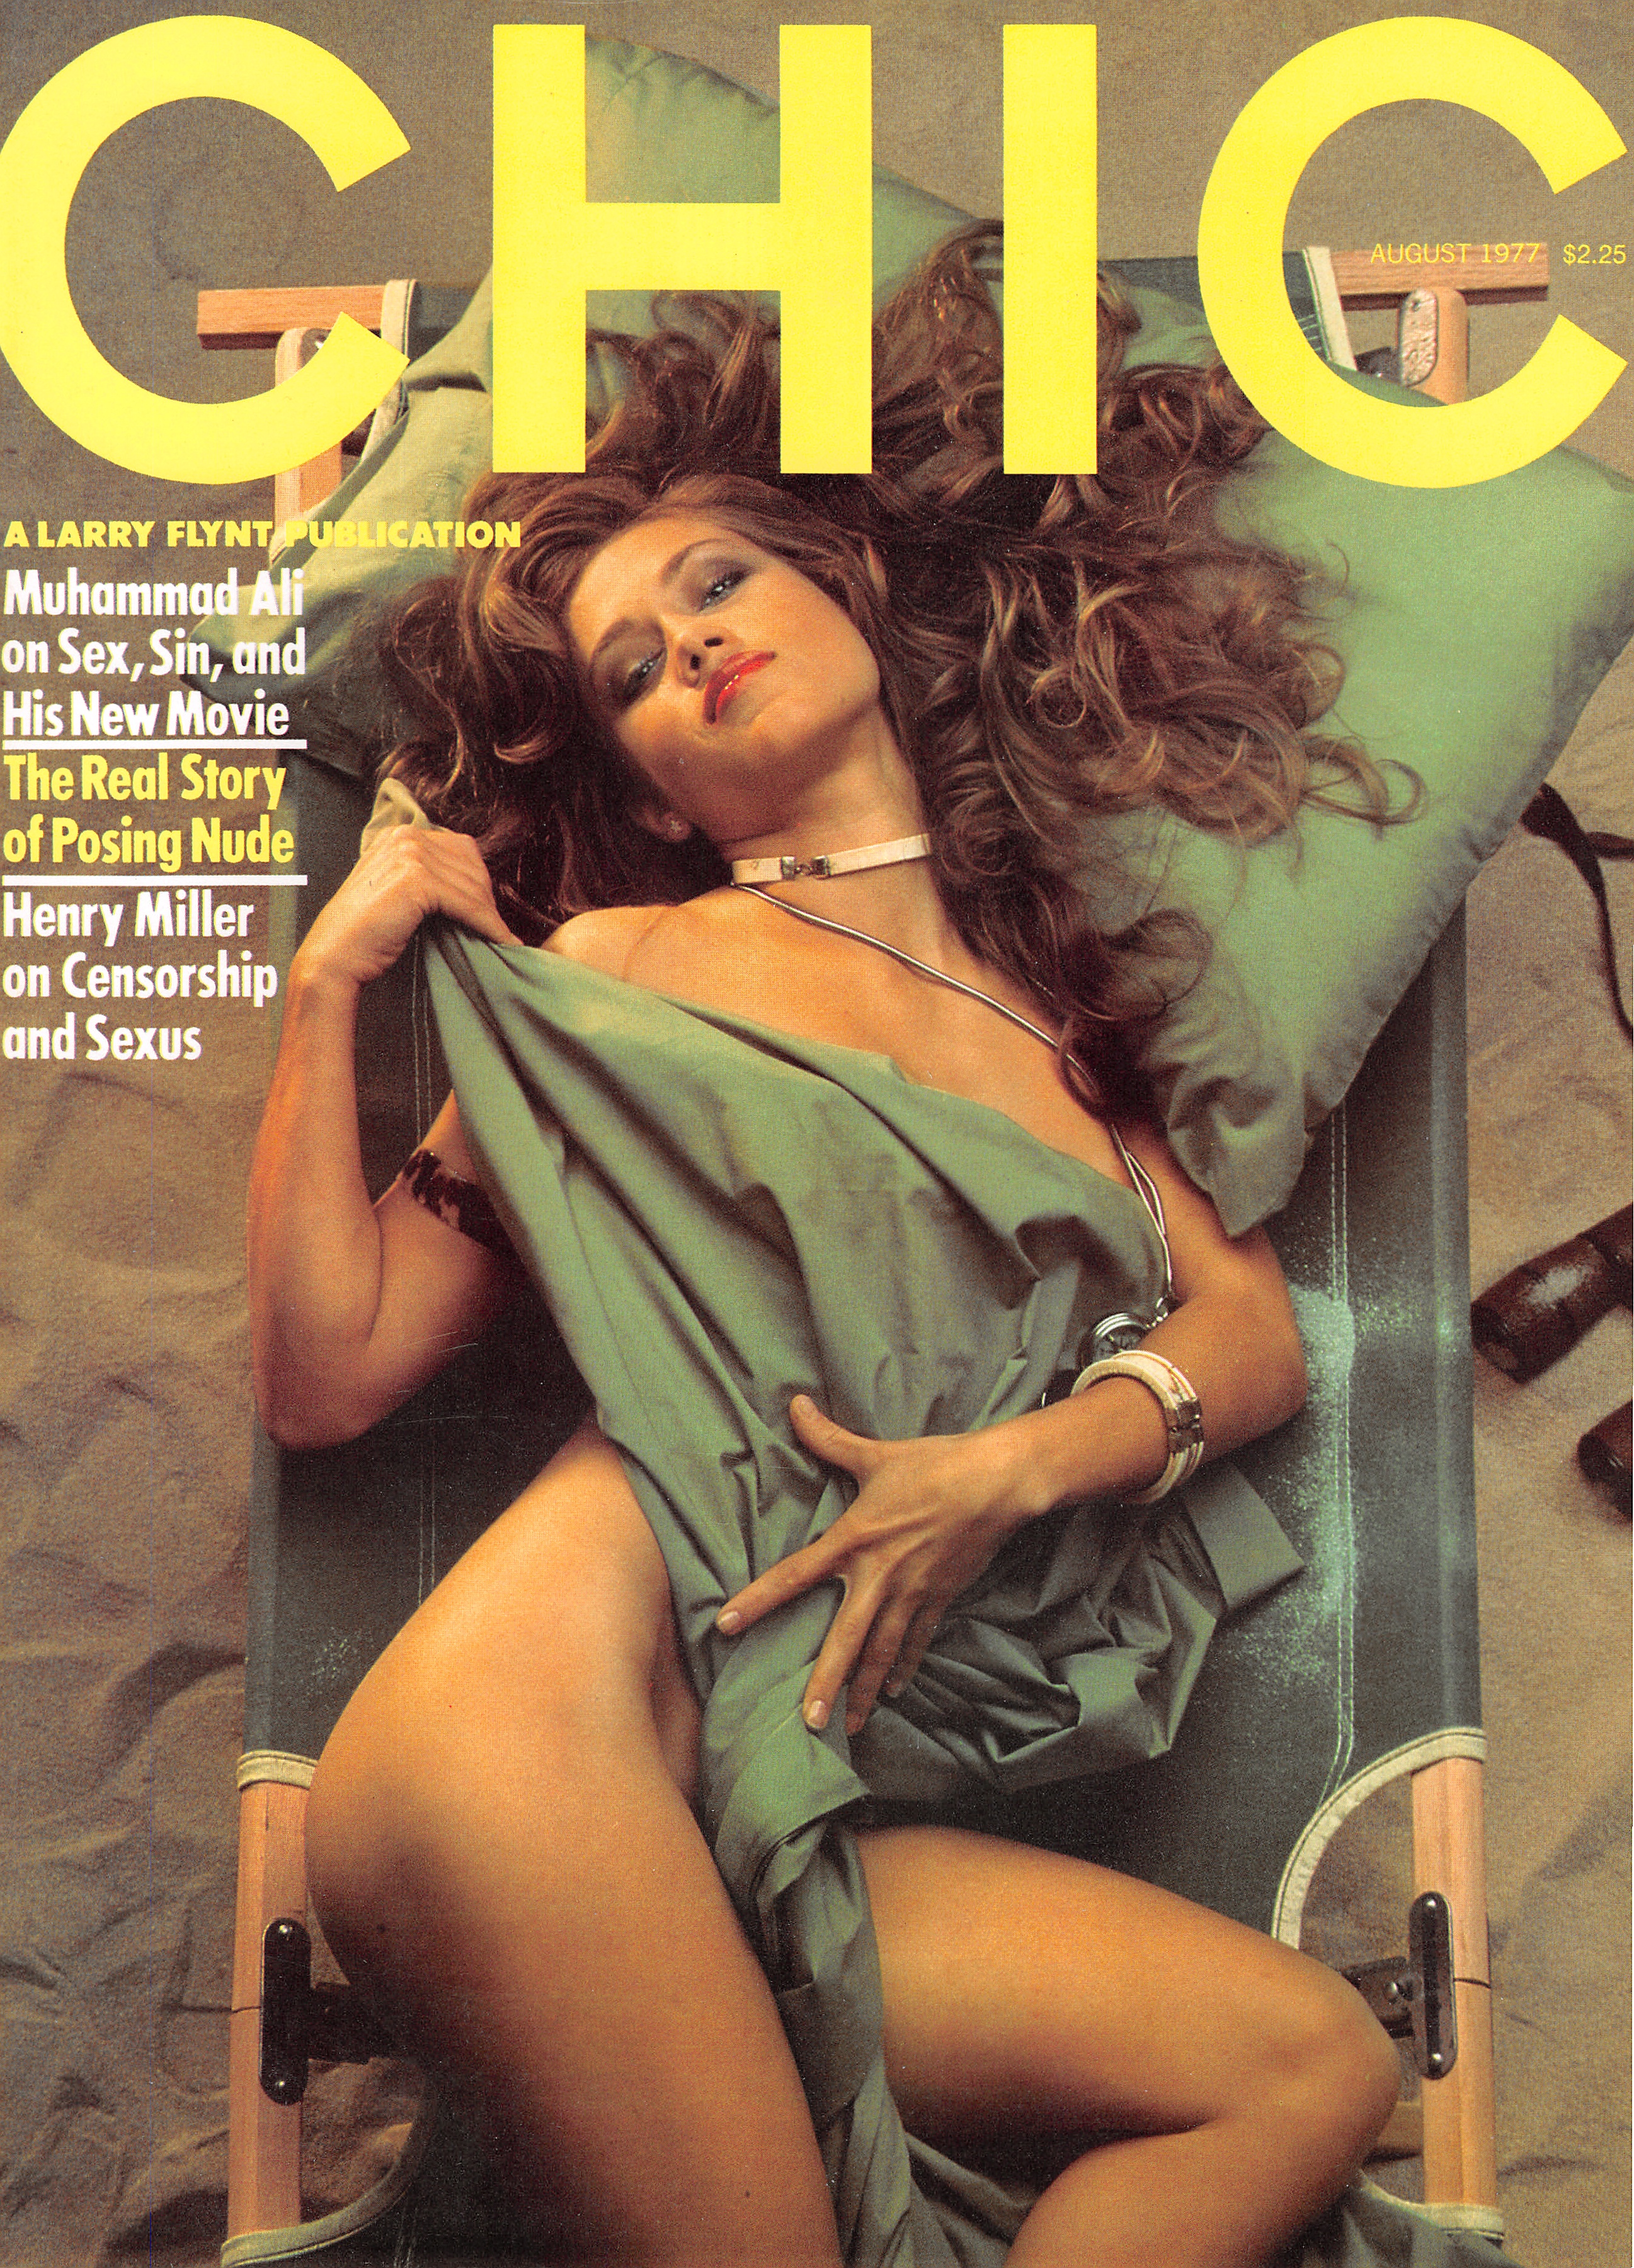 Chic August 1977 magazine back issue Chic magizine back copy Chic August 1977 Adult Pornographic Magazine Back Issue Published by LFP, Larry Flynt Publications. Covergirl Marsha (Nude Centerfold) .